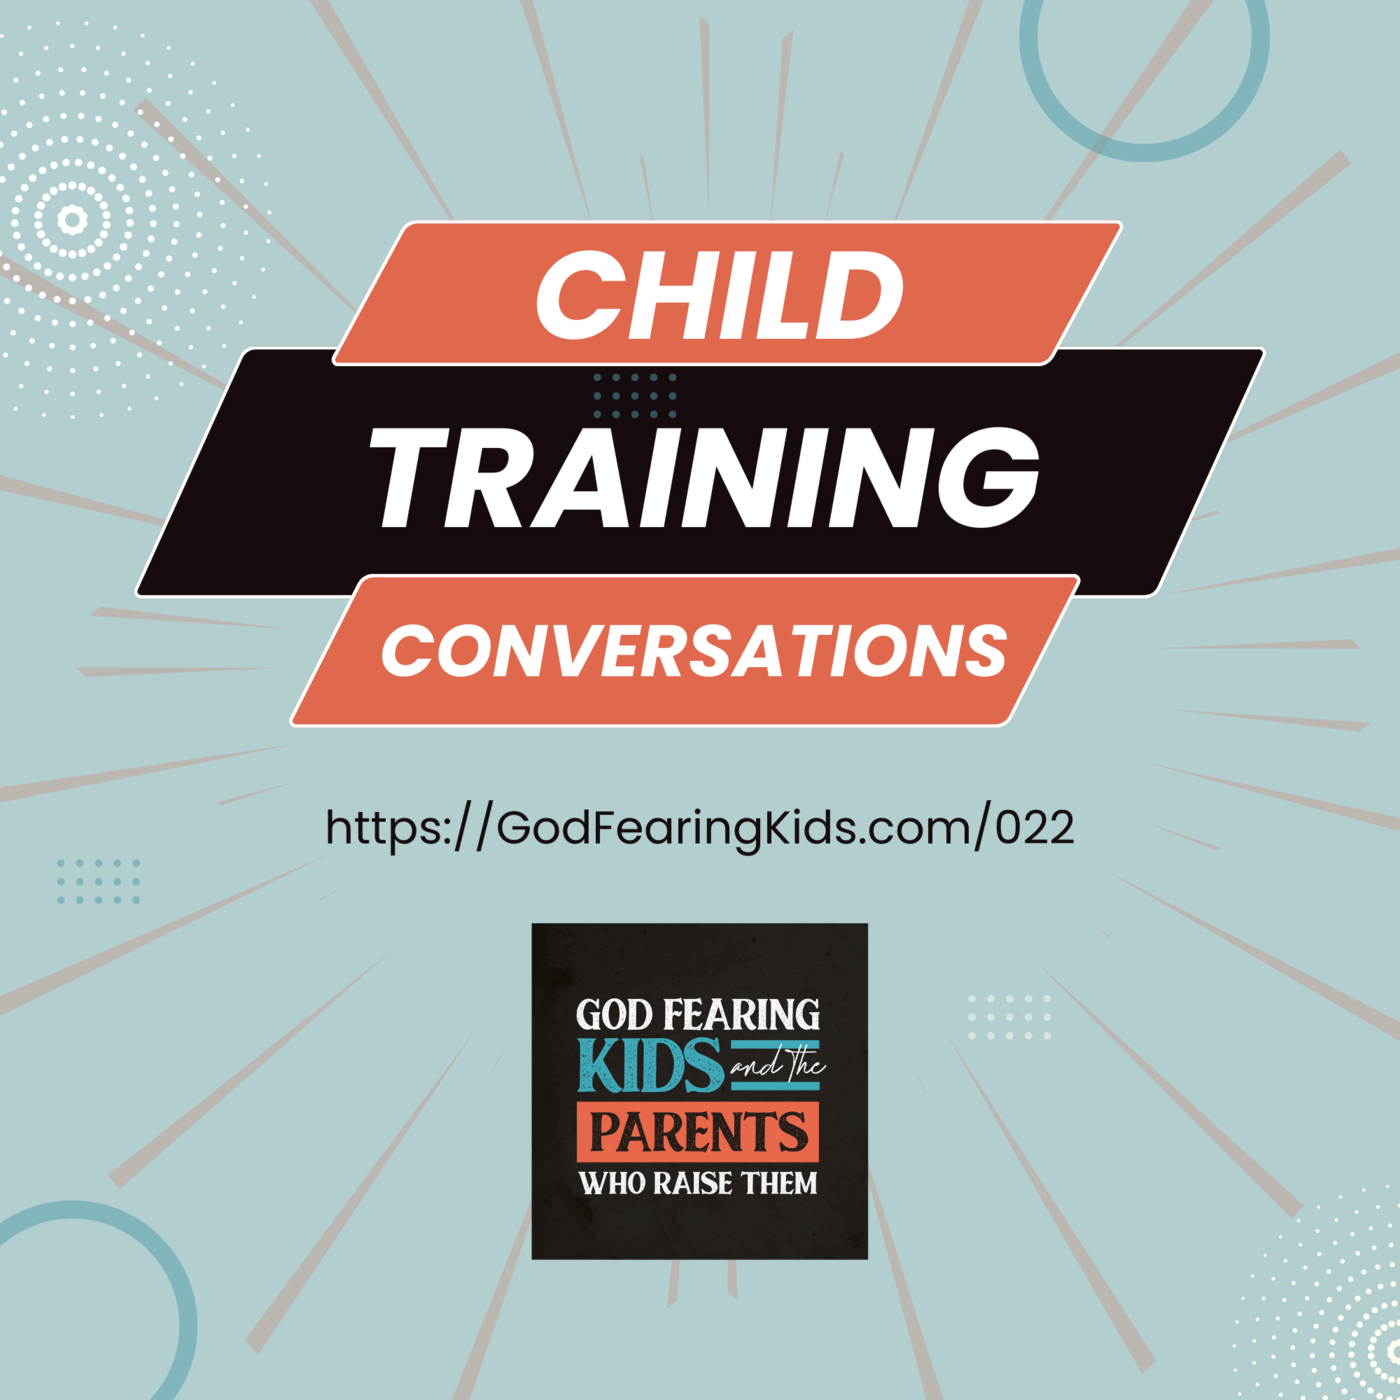 022: Child training conversations (an example or two)